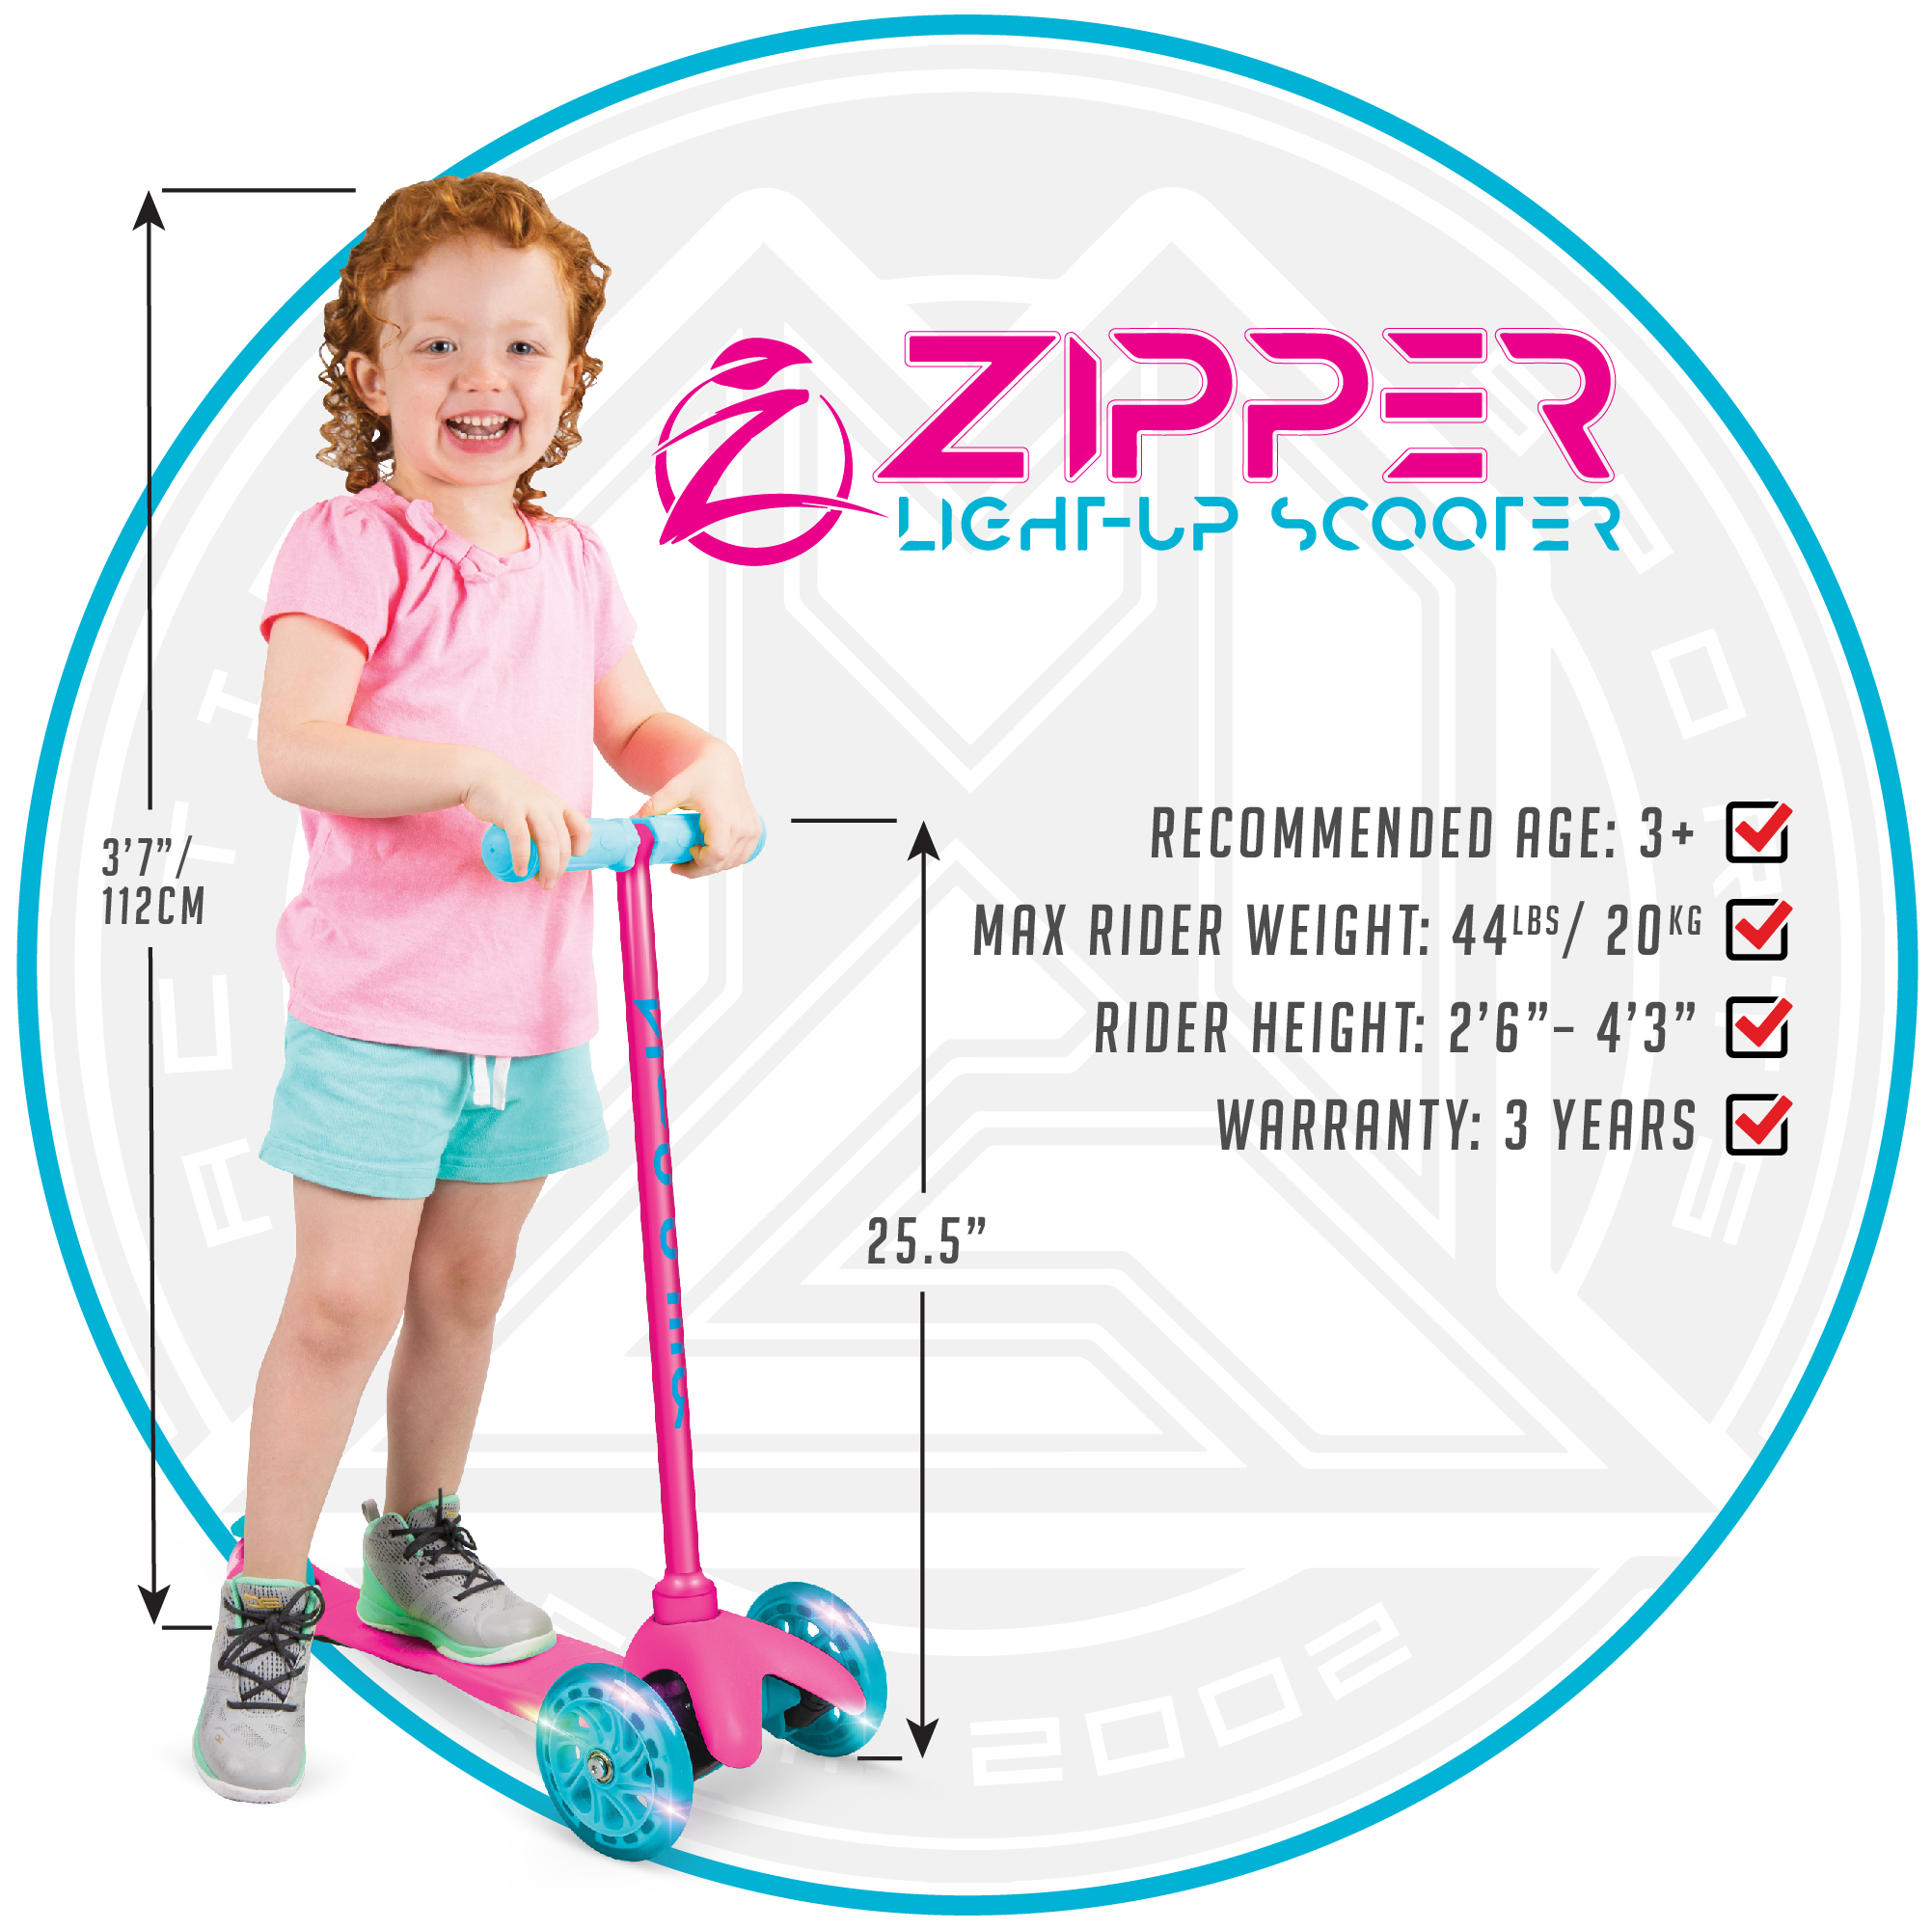 Zycom – Zipper Pink 3 Wheel Scooter with Light Up Wheels – Suits Boys & Girls Ages 3+ - Max Rider Weight 44lbs – 3 Year Manufacturer’s Warranty – Built to Last! - image 5 of 8